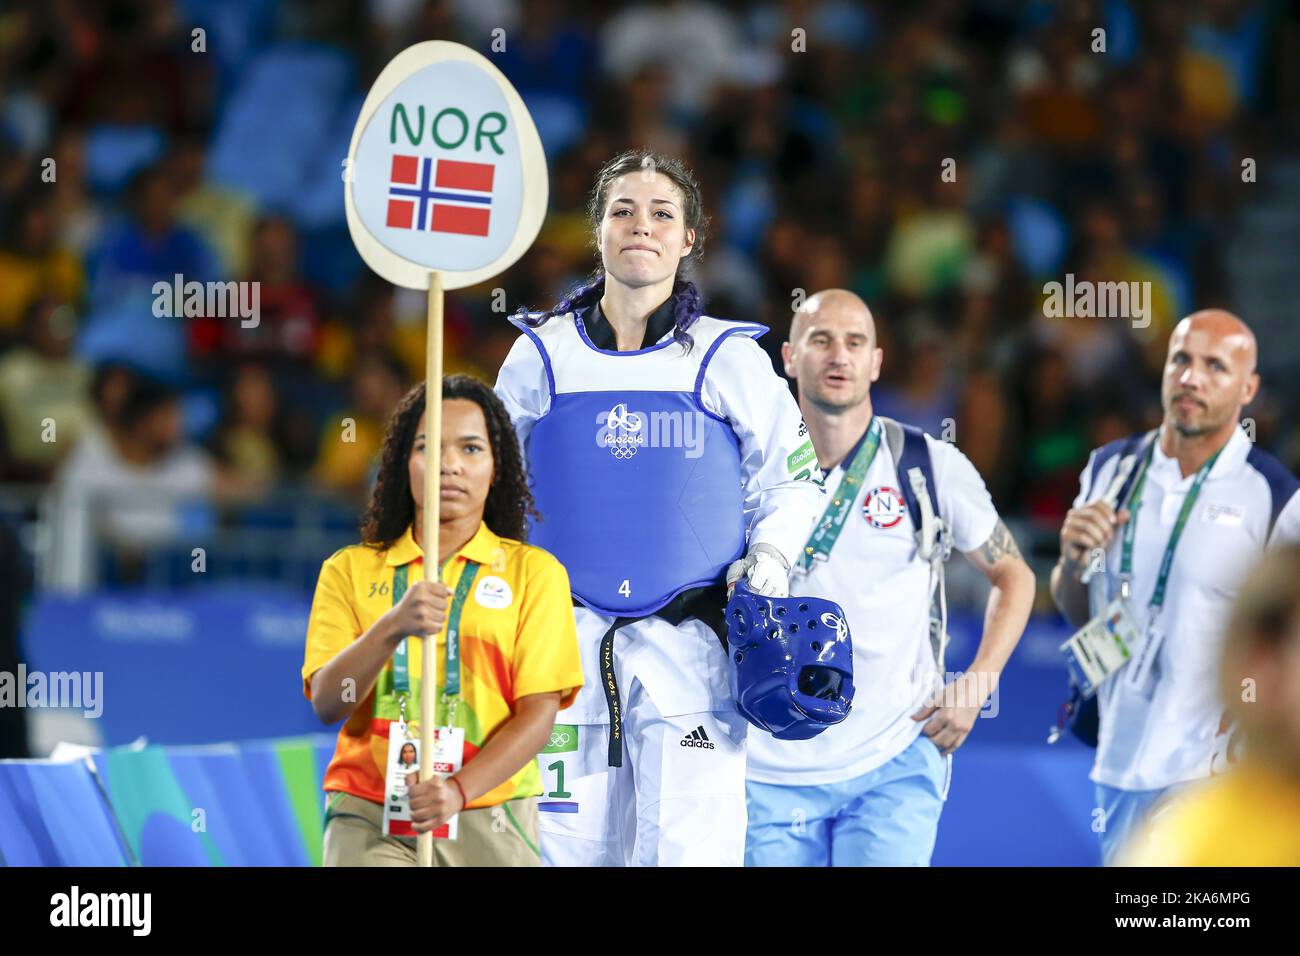 RIO DE JANEIRO, BRAZIL 20160820. Summer Olympics in Rio in 2016. Norway's taekwondo hope Tina Roe Skaar before the match against the reigning Olympic champion Milica Mandic of Serbia during the Olympics tournament in Taekwondo in Carioca Arena in Rio de Janeiro Saturday. She lost 2-8. Photo: Heiko Junge / NTB scanpix Stock Photo